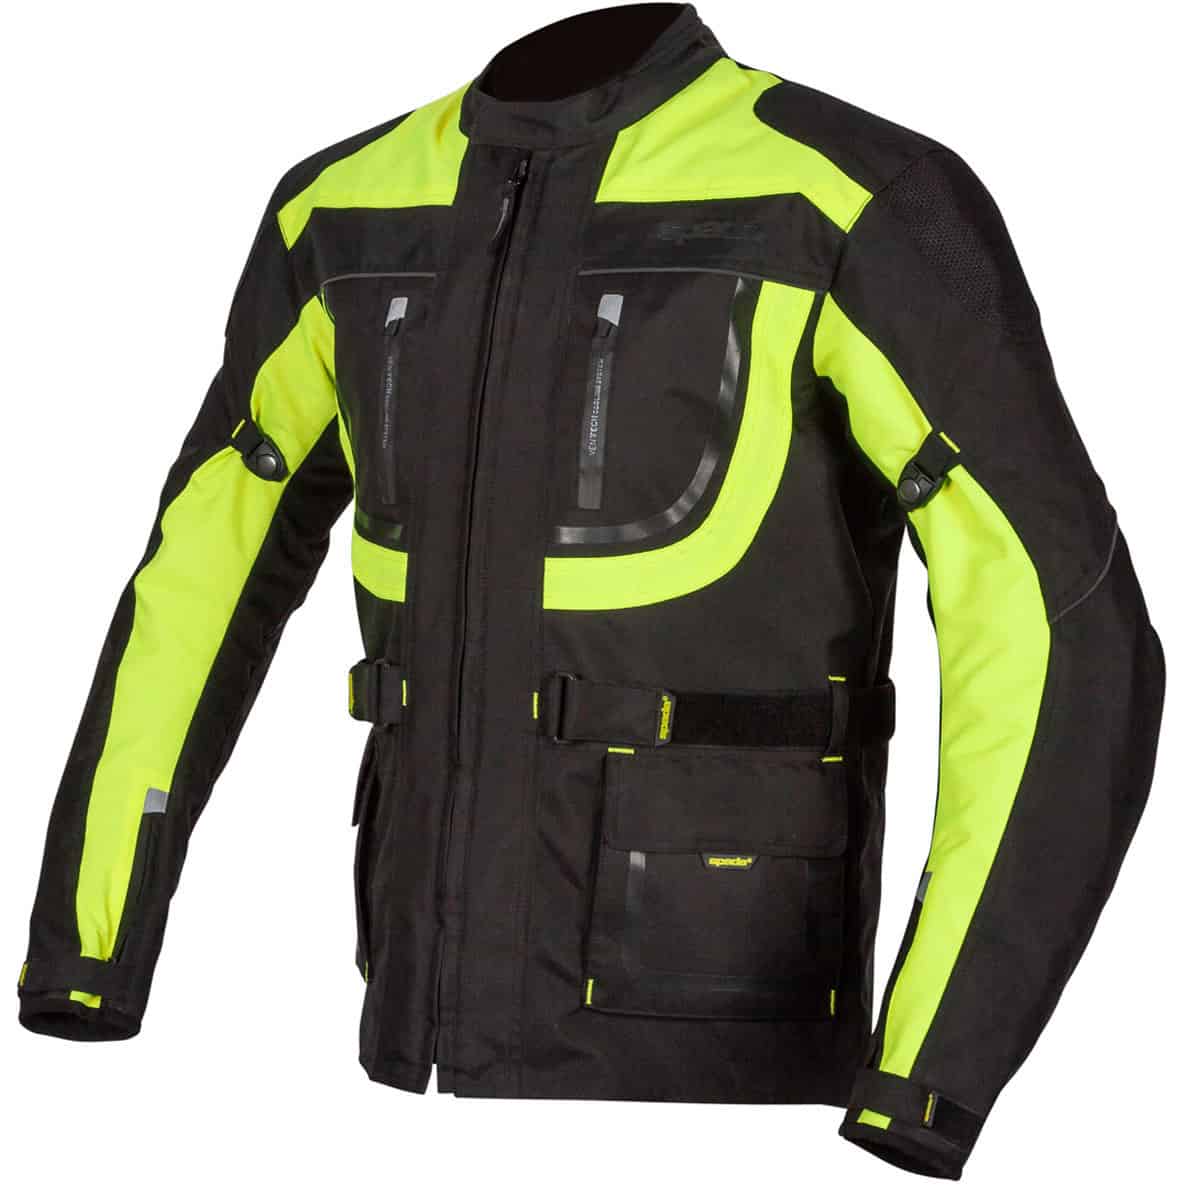 The Zorst from Spada packs plenty of features into a very well-priced jacket 2